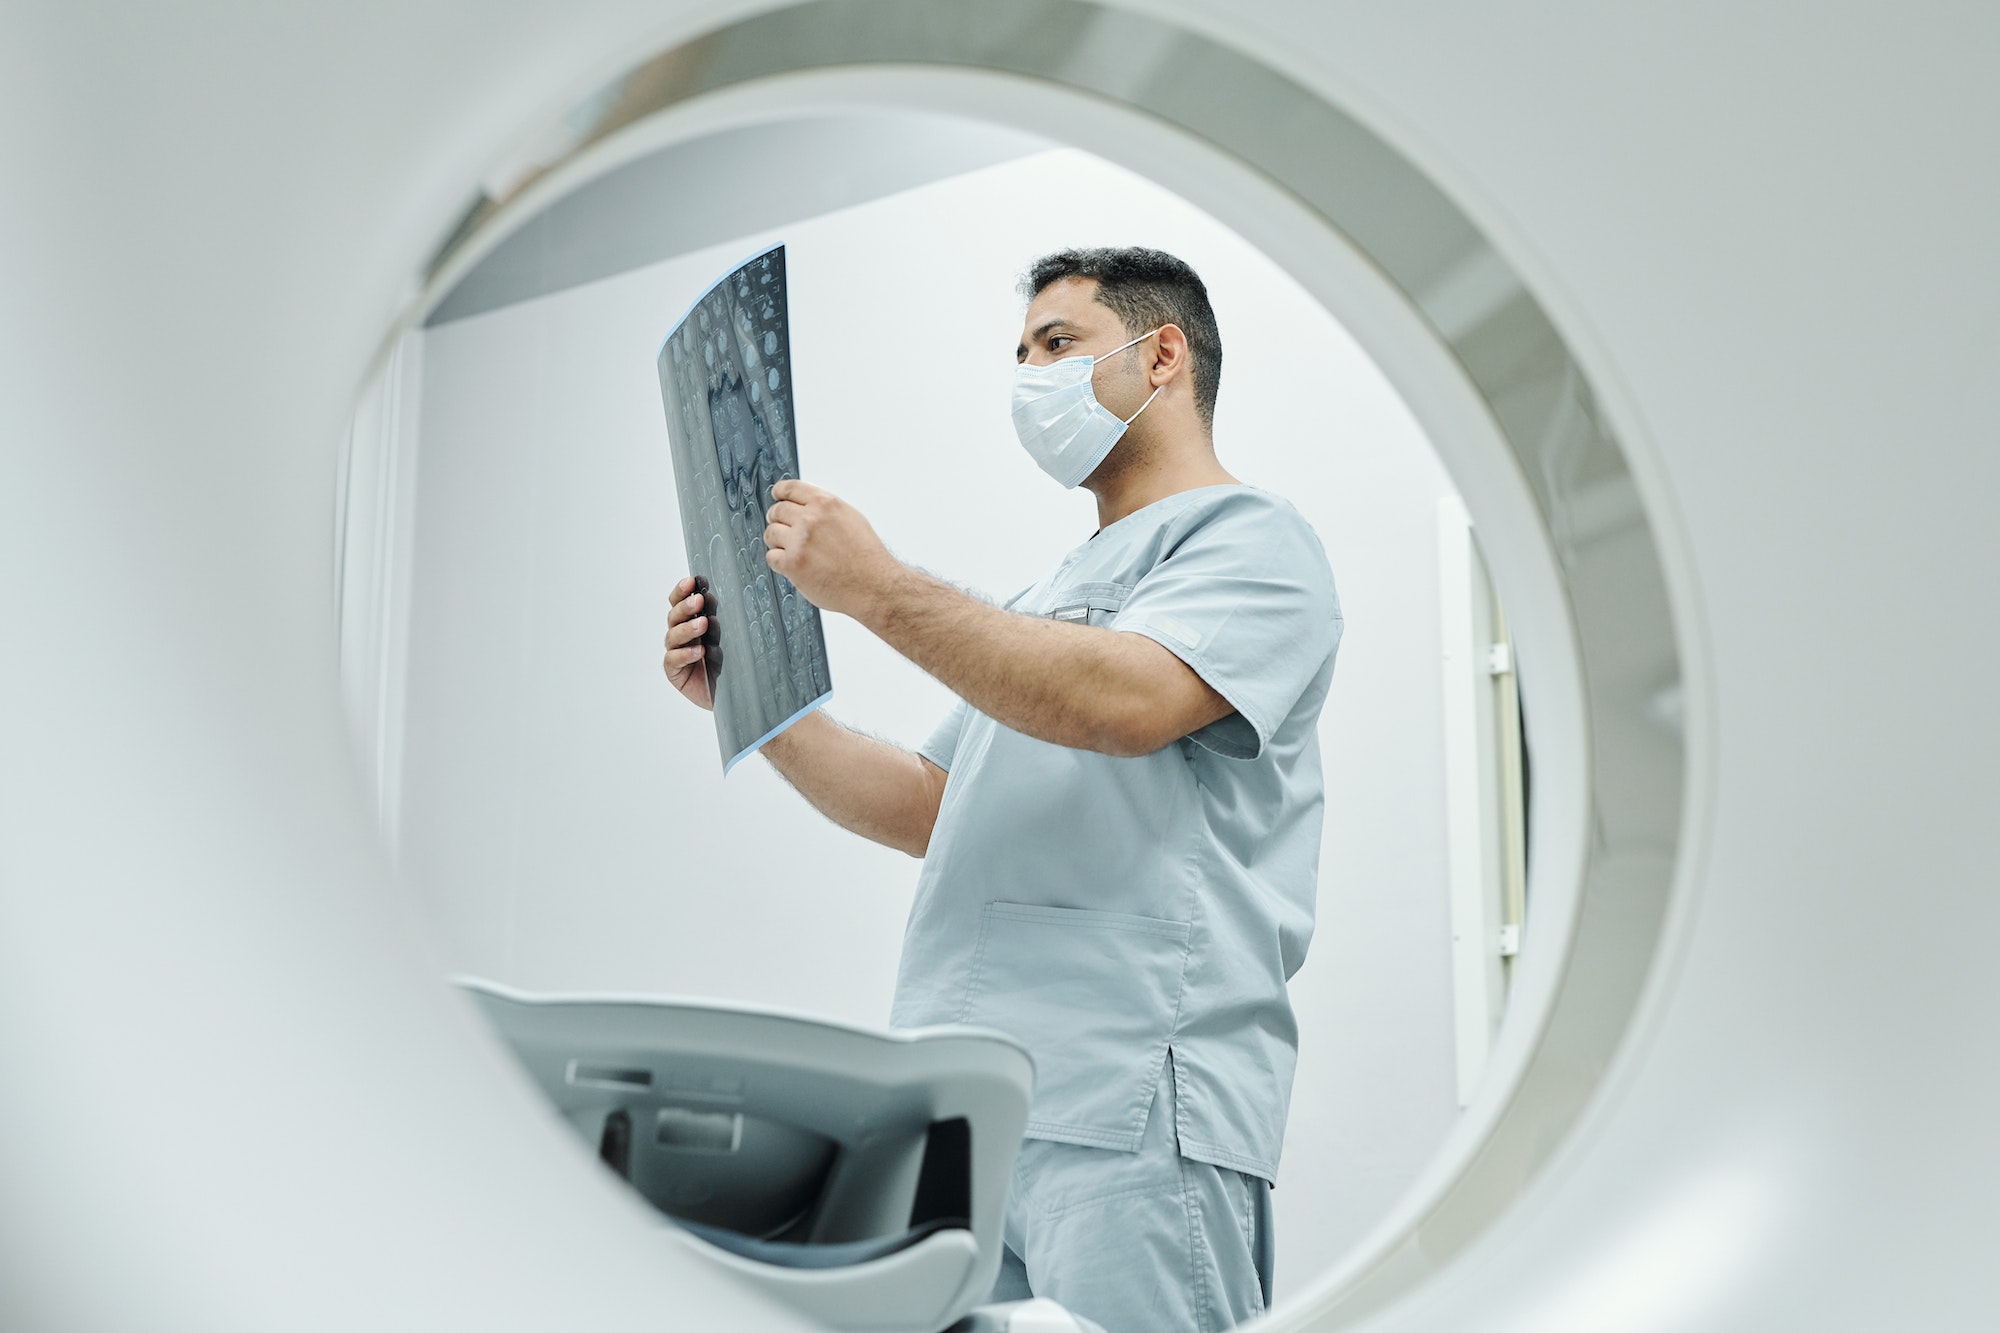 Serious mature mixed-race radiologist in mask and uniform looking at x-ray image